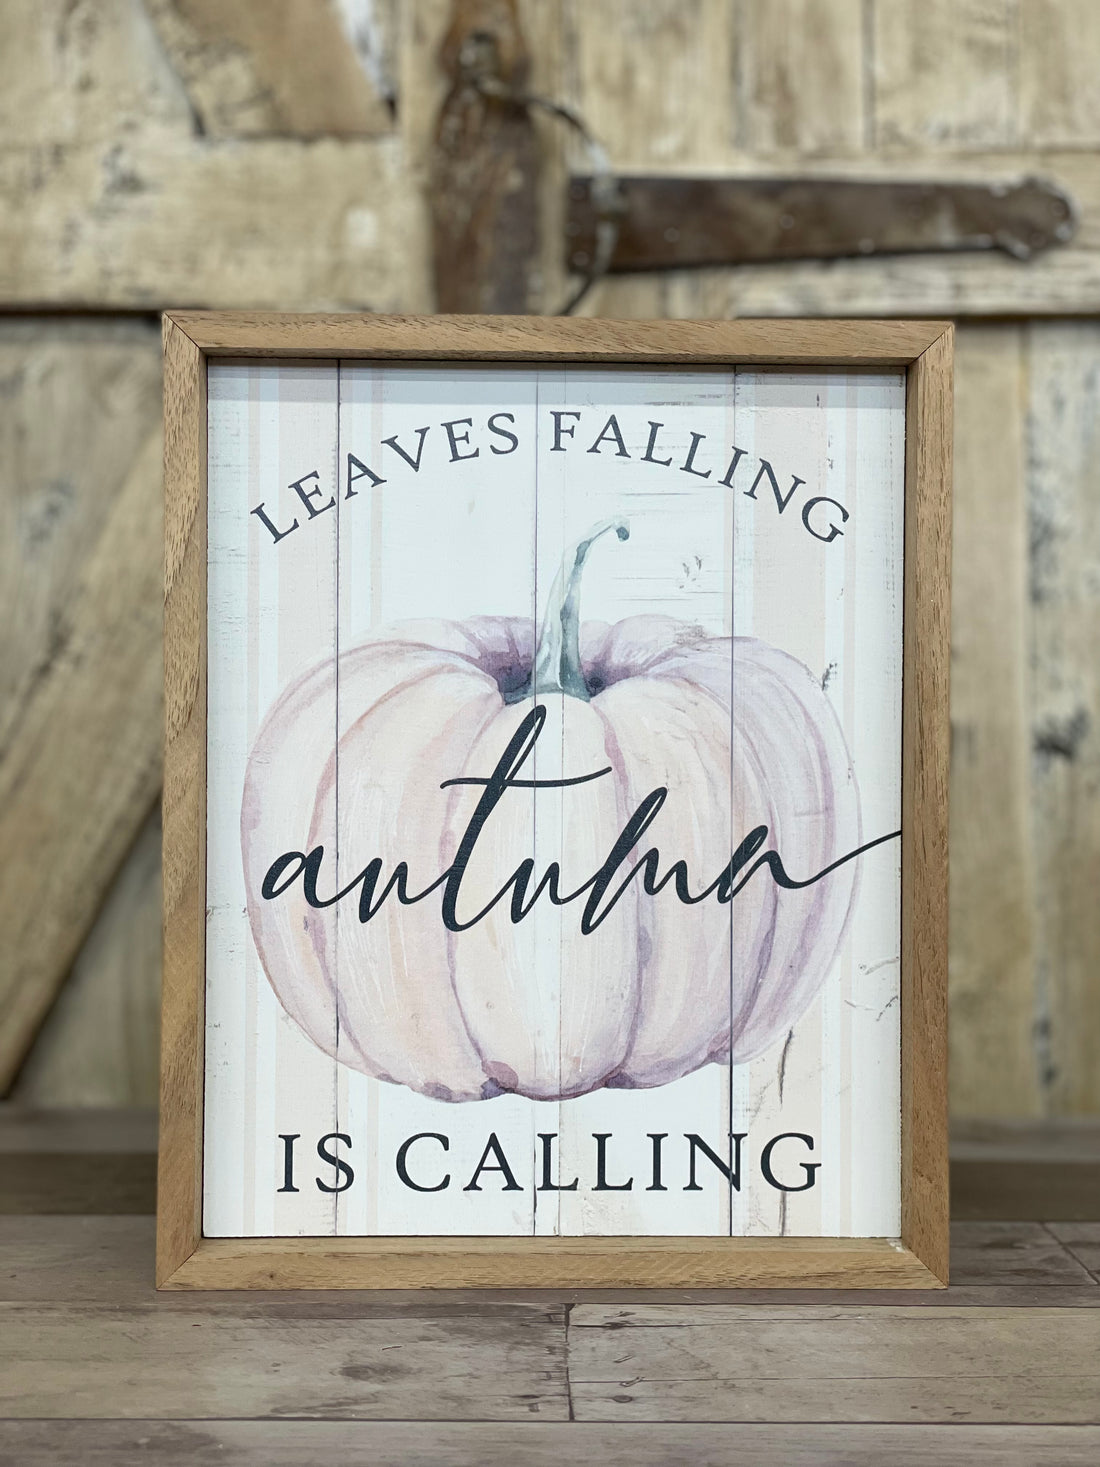 Leaves Falling Autumn is Calling Wood Plaque